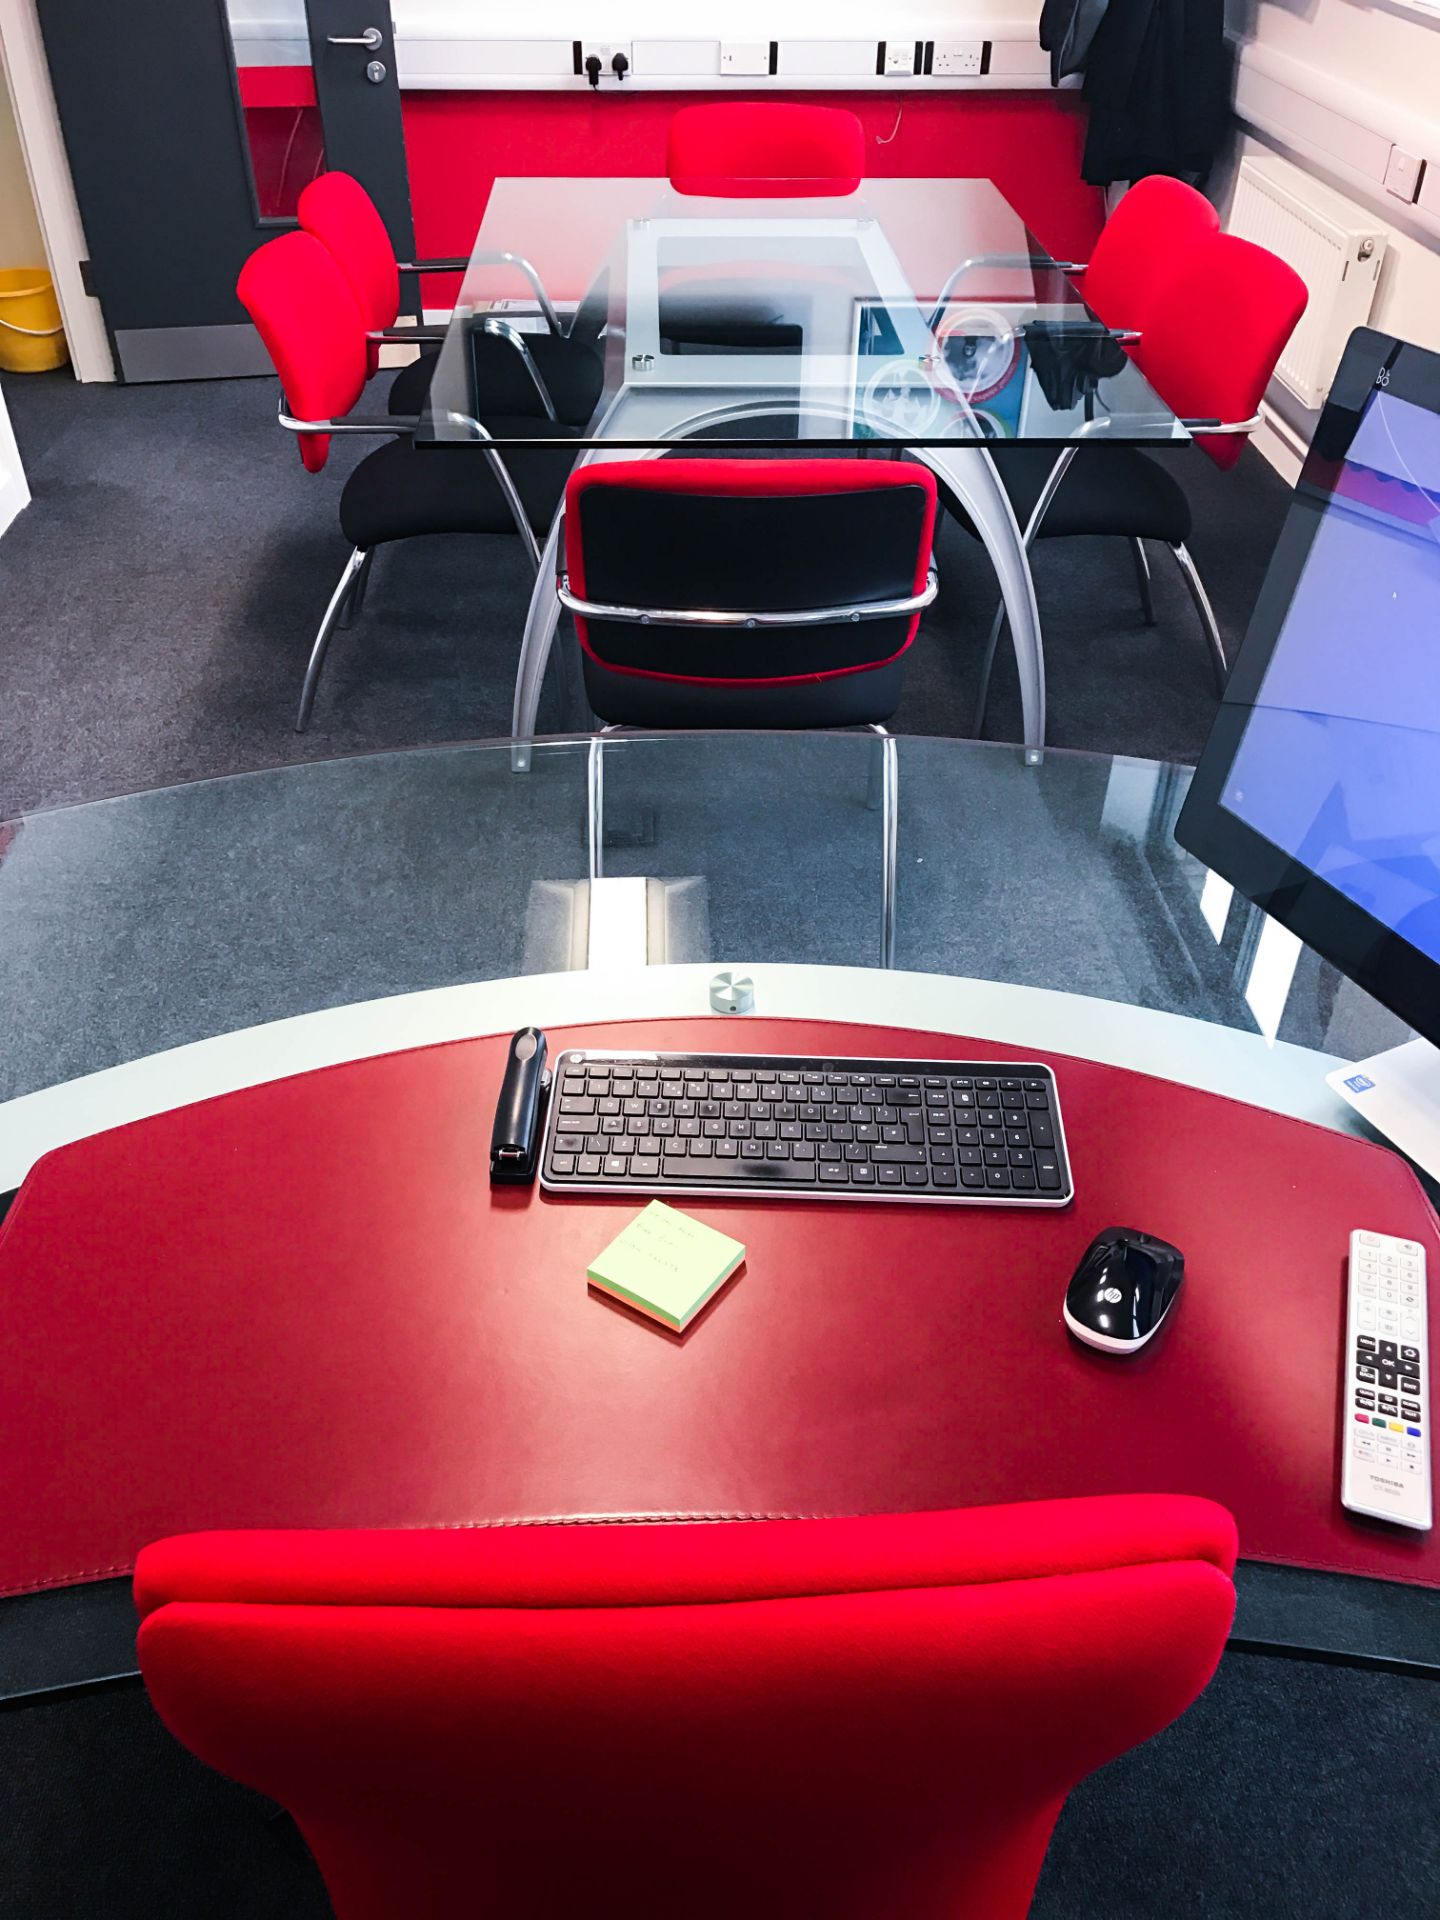 Meeting/Conference table designed by the Italian Ferrari designer Pininfarina and made by Uffix. - Image 10 of 12